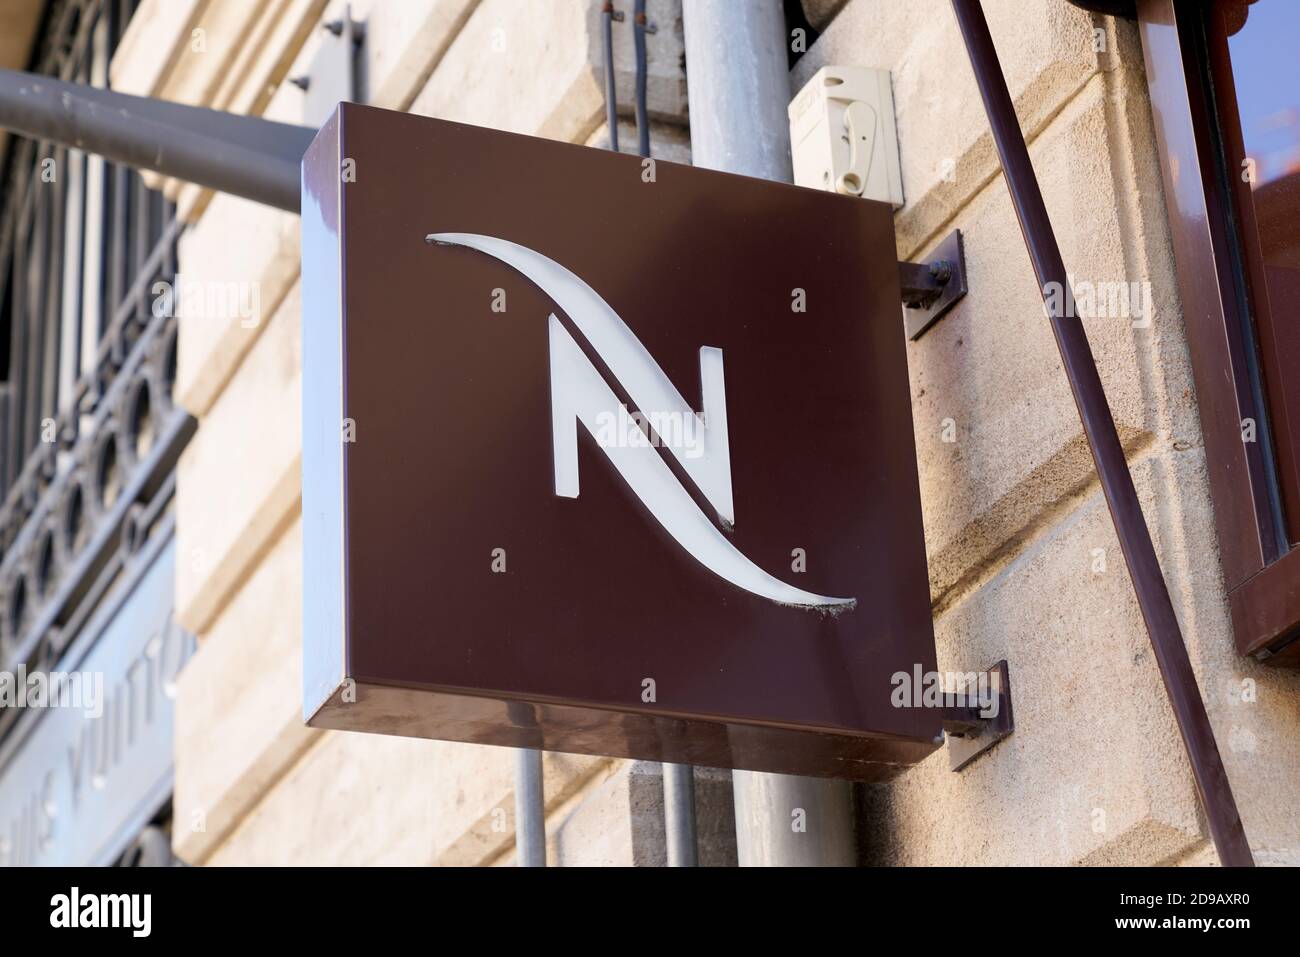 Bordeaux , Aquitaine / France - 11 01 2020 : Nespresso logo brown sign shop coffee machines capsules brand accessories store Stock Photo